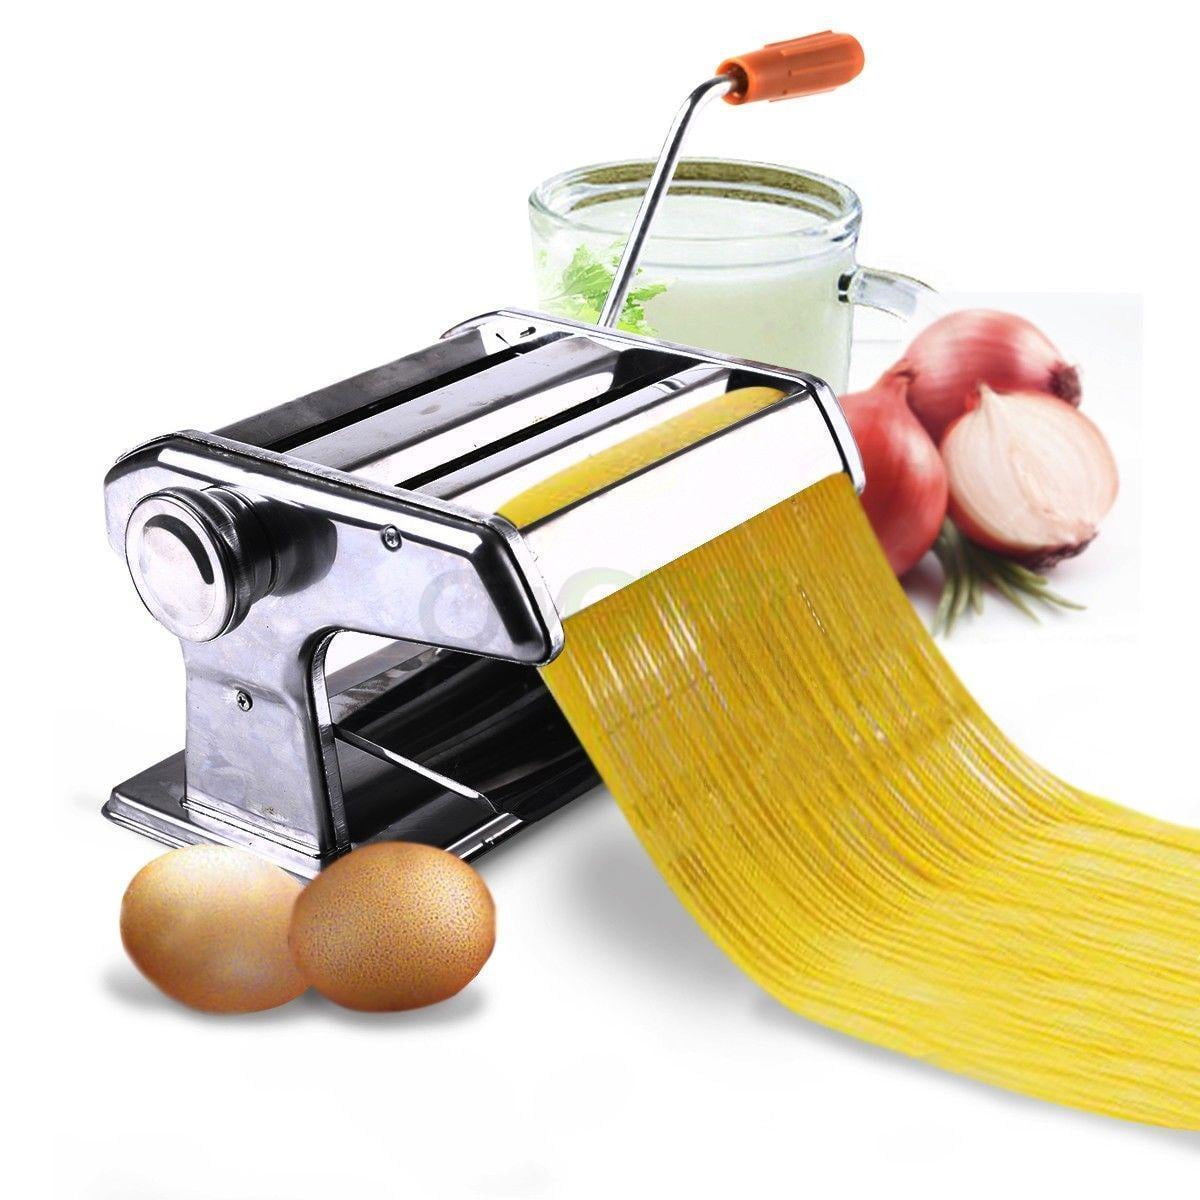 GEKER Electric Pasta Maker Machine, Automatic Pasta and Noodle Maker- 6  Noodle Shapes to Choose- Home Pasta Maker for Spaghetti,Fettuccine,Macaroni,  Dishwasher Safe Parts - Coupon Codes, Promo Codes, Daily Deals, Save Money